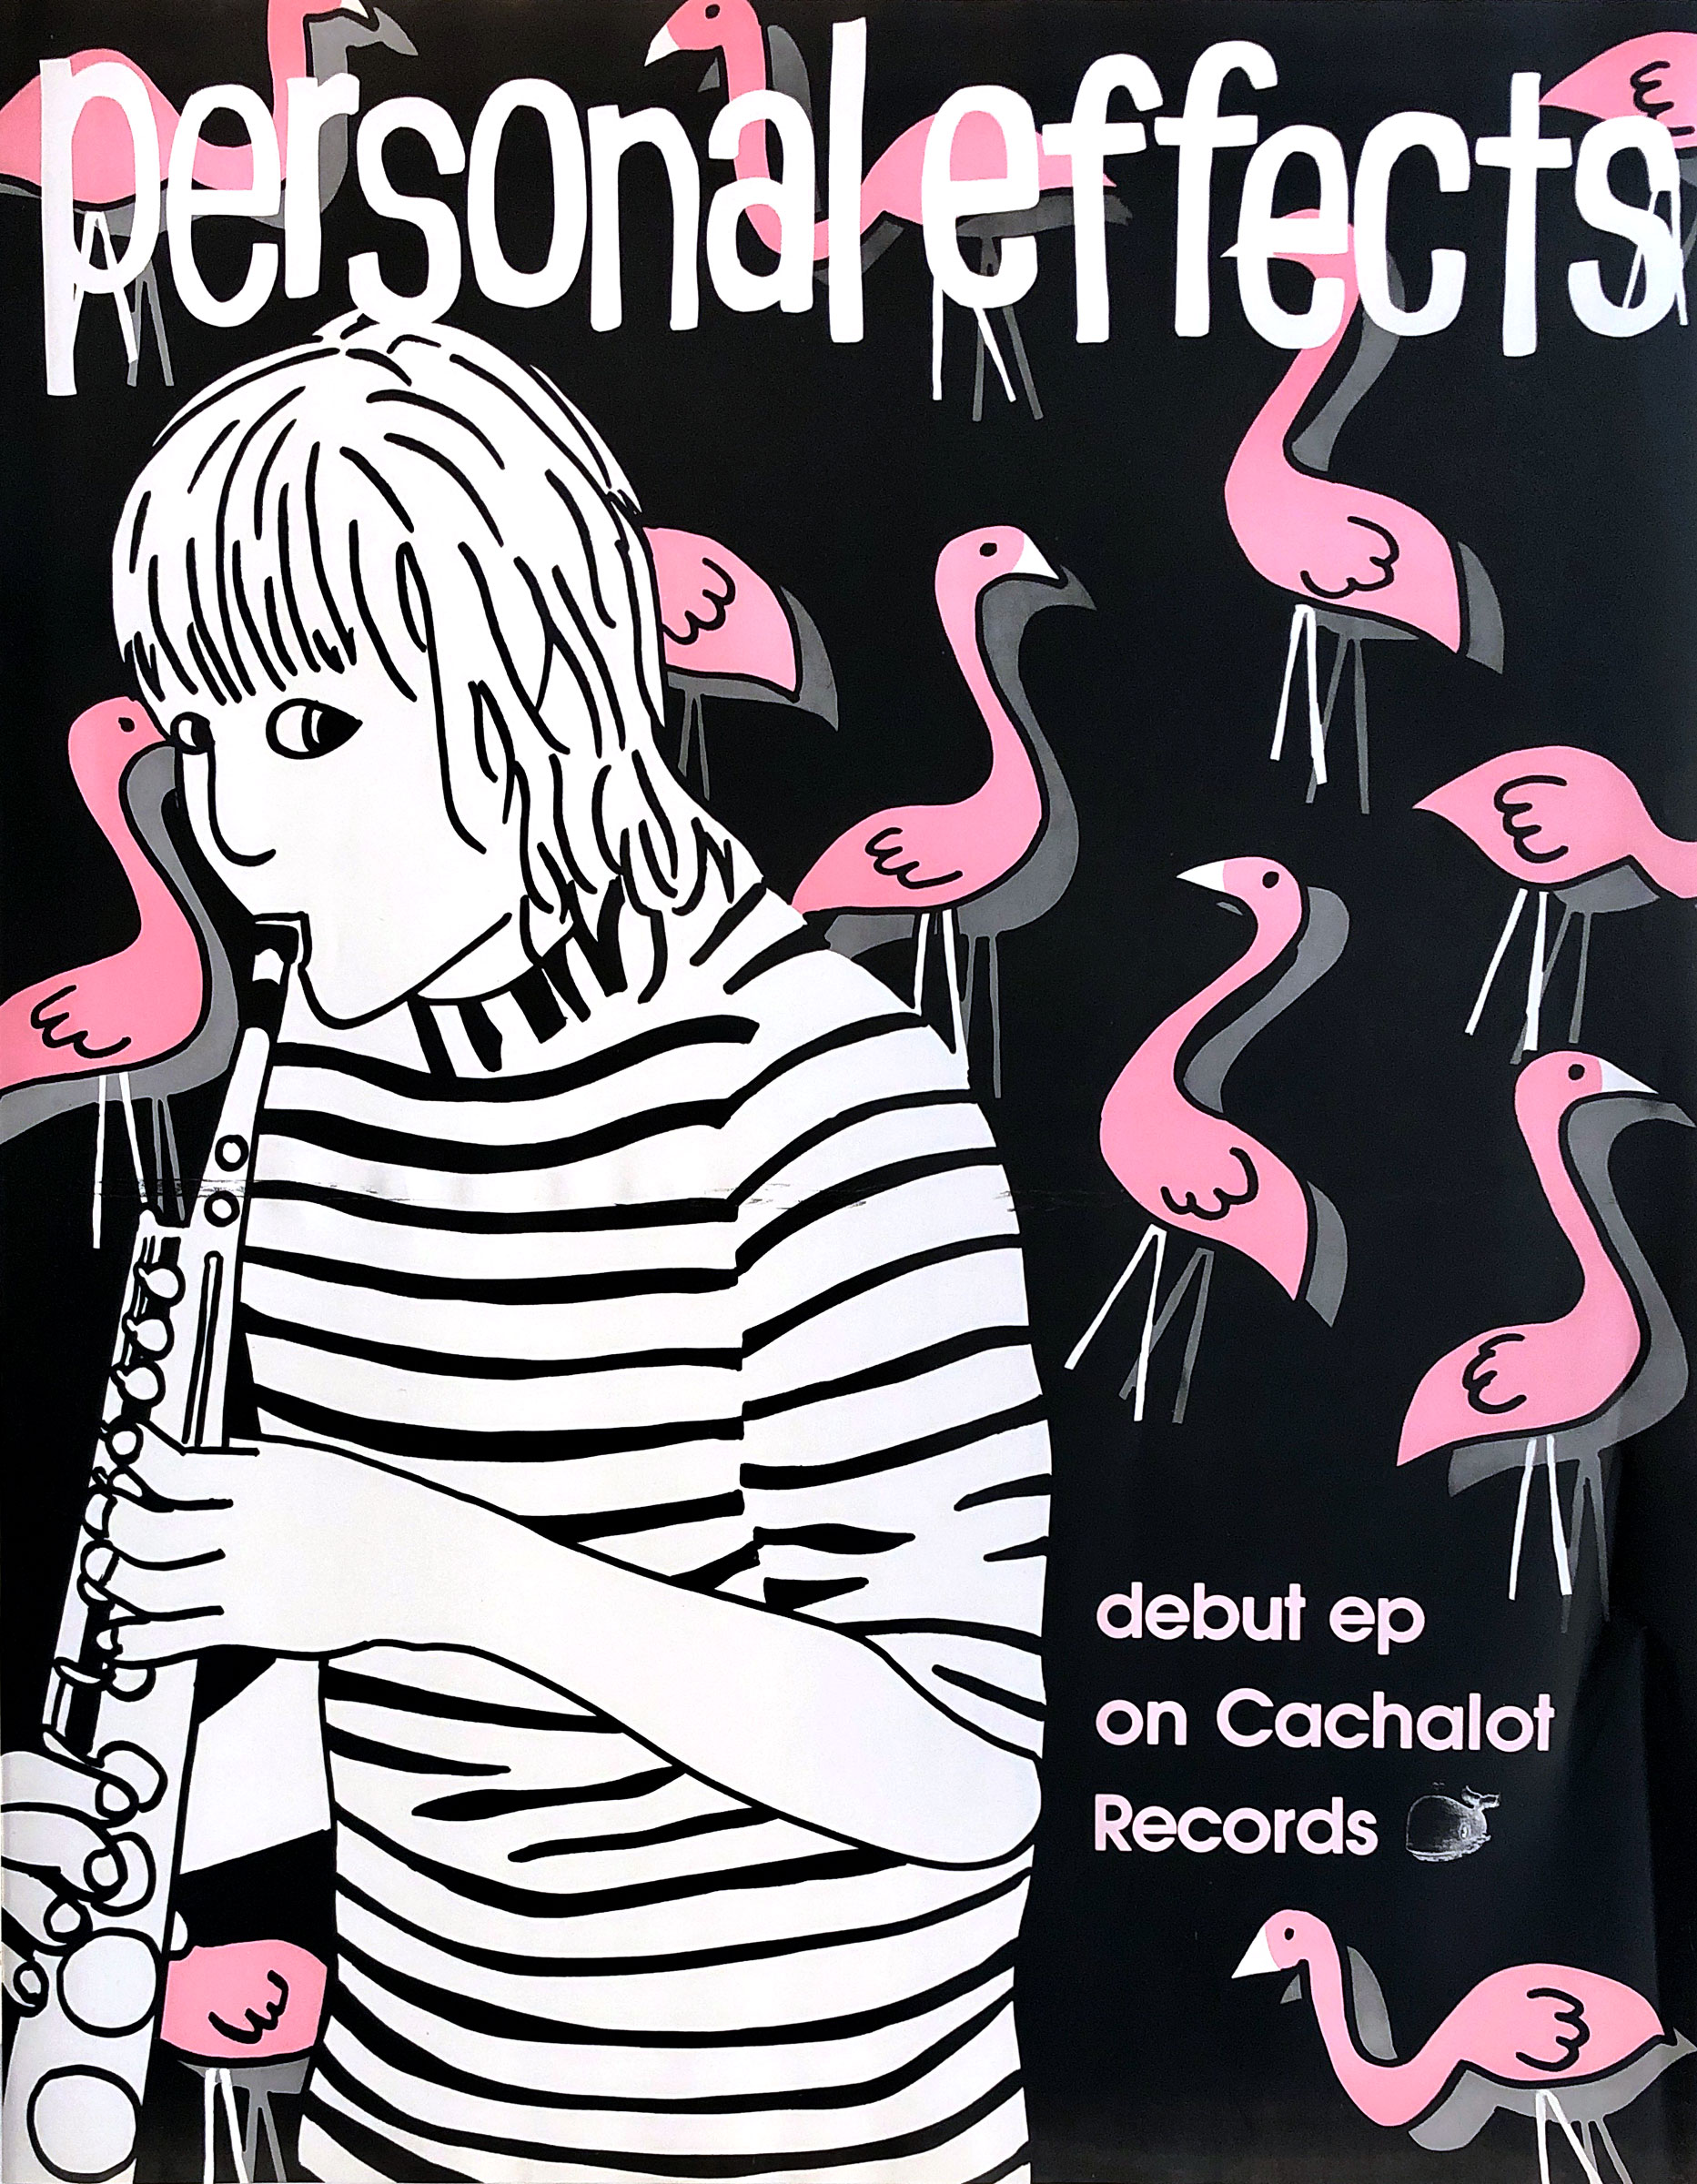 Promotional poster for Personal Effects self-titled debut EP on Cachalot Records